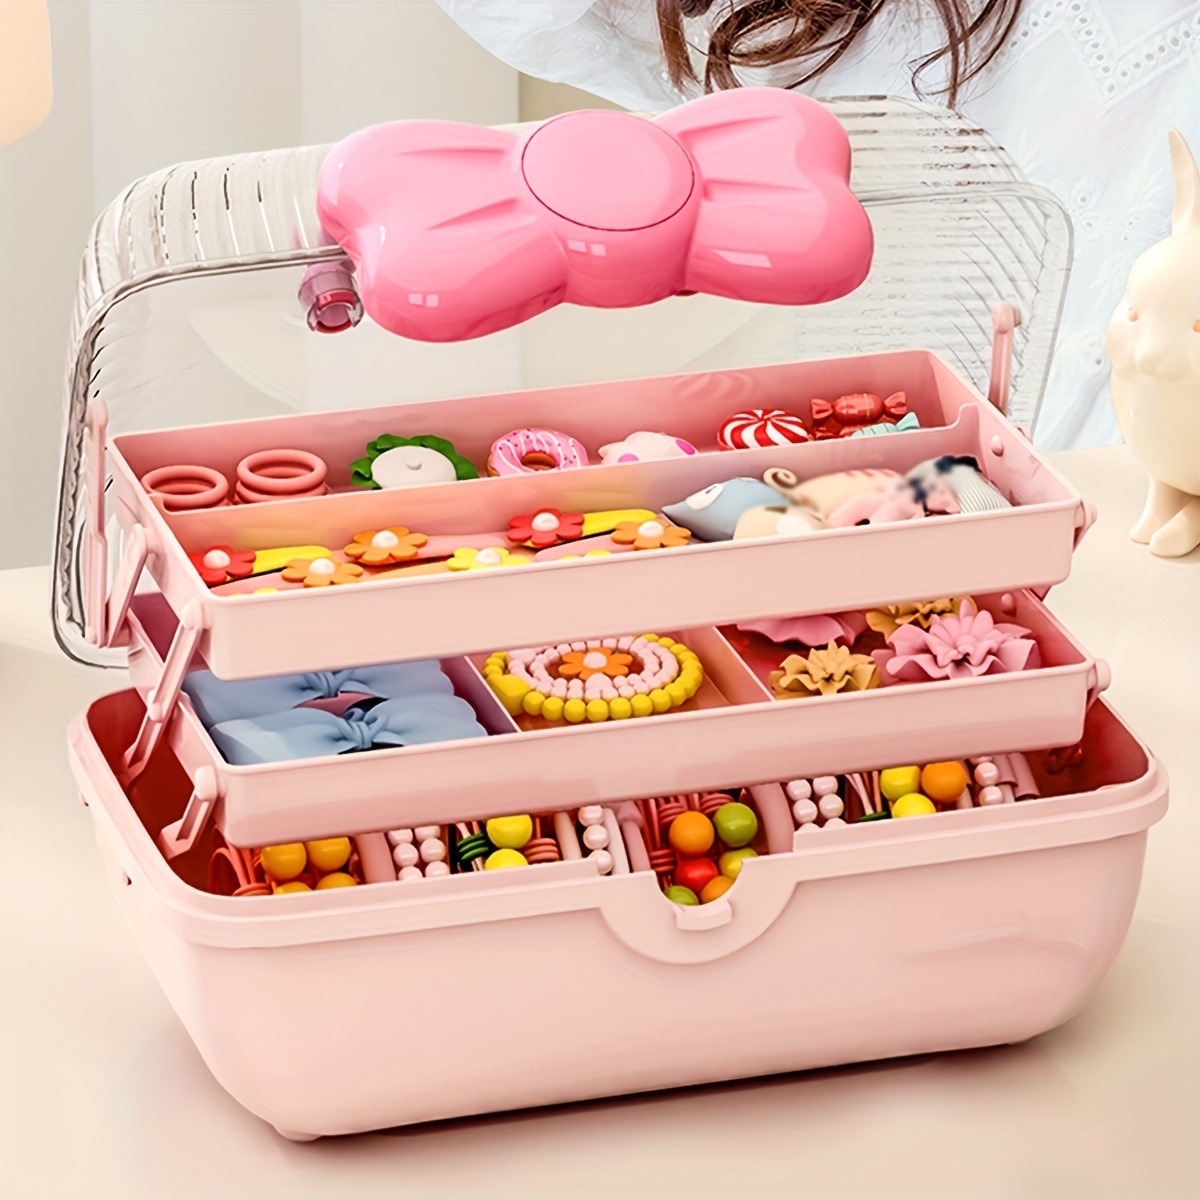 TEHAUX Box Hair Clips Hair Barrettes Hair Accessory Organizer for Girls  Storage Case for Storage Cute Jewelry Holder Hair Accessory Container  Jewelry